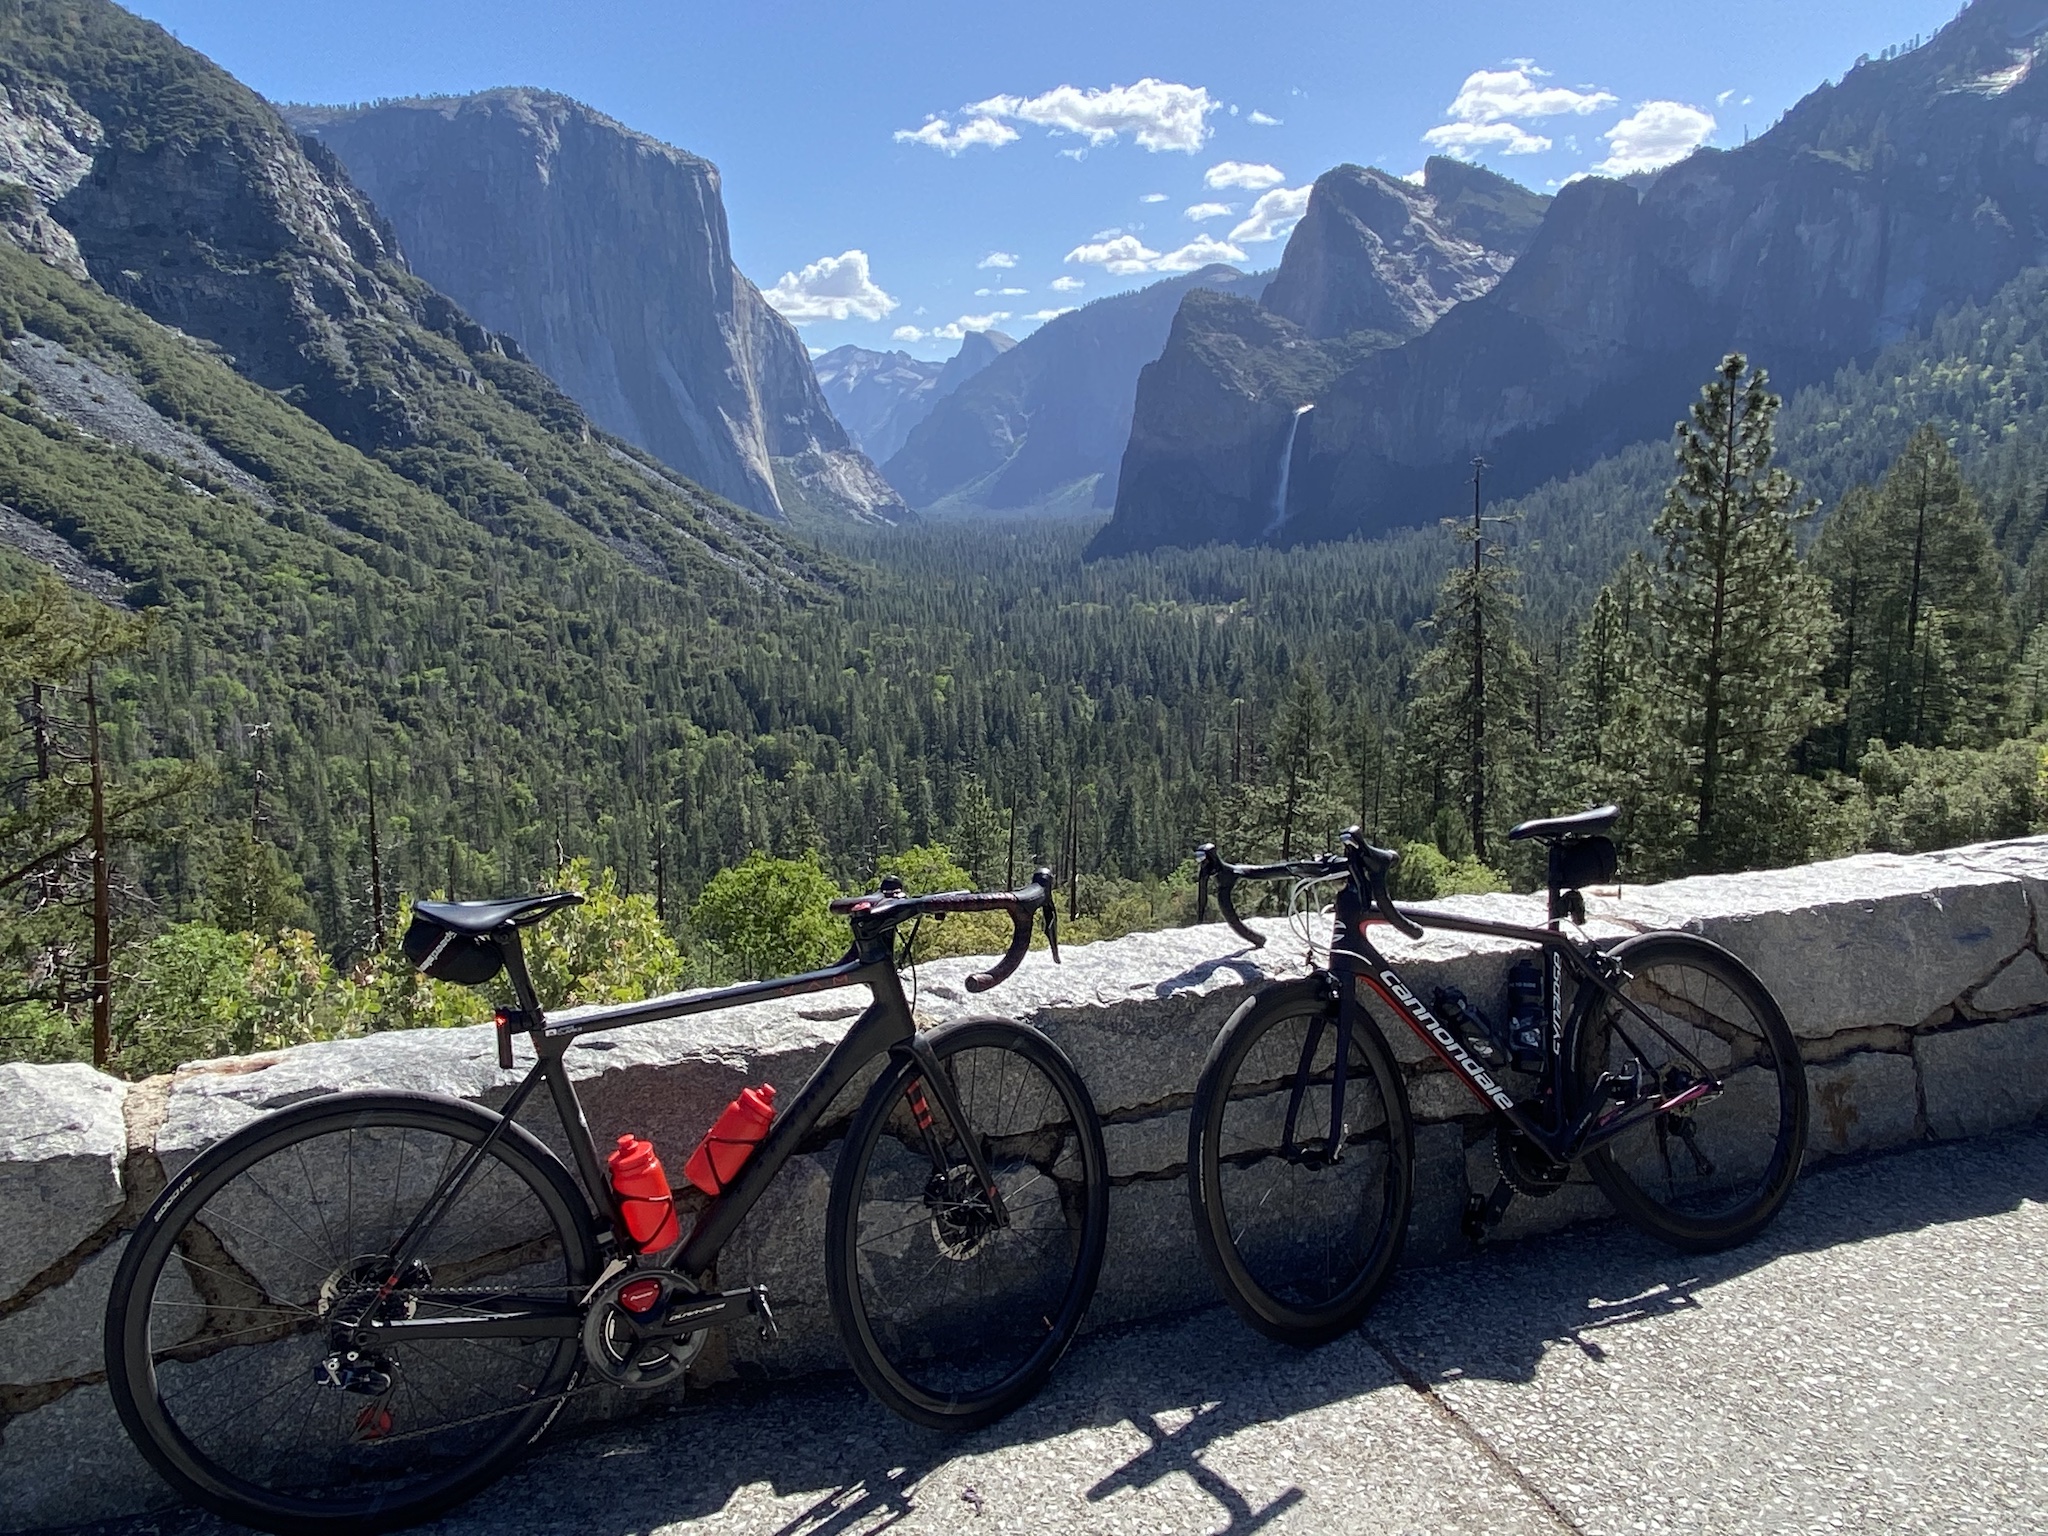 Bikes parked out at Tunnel View near the entrance to Yosemite Valley.